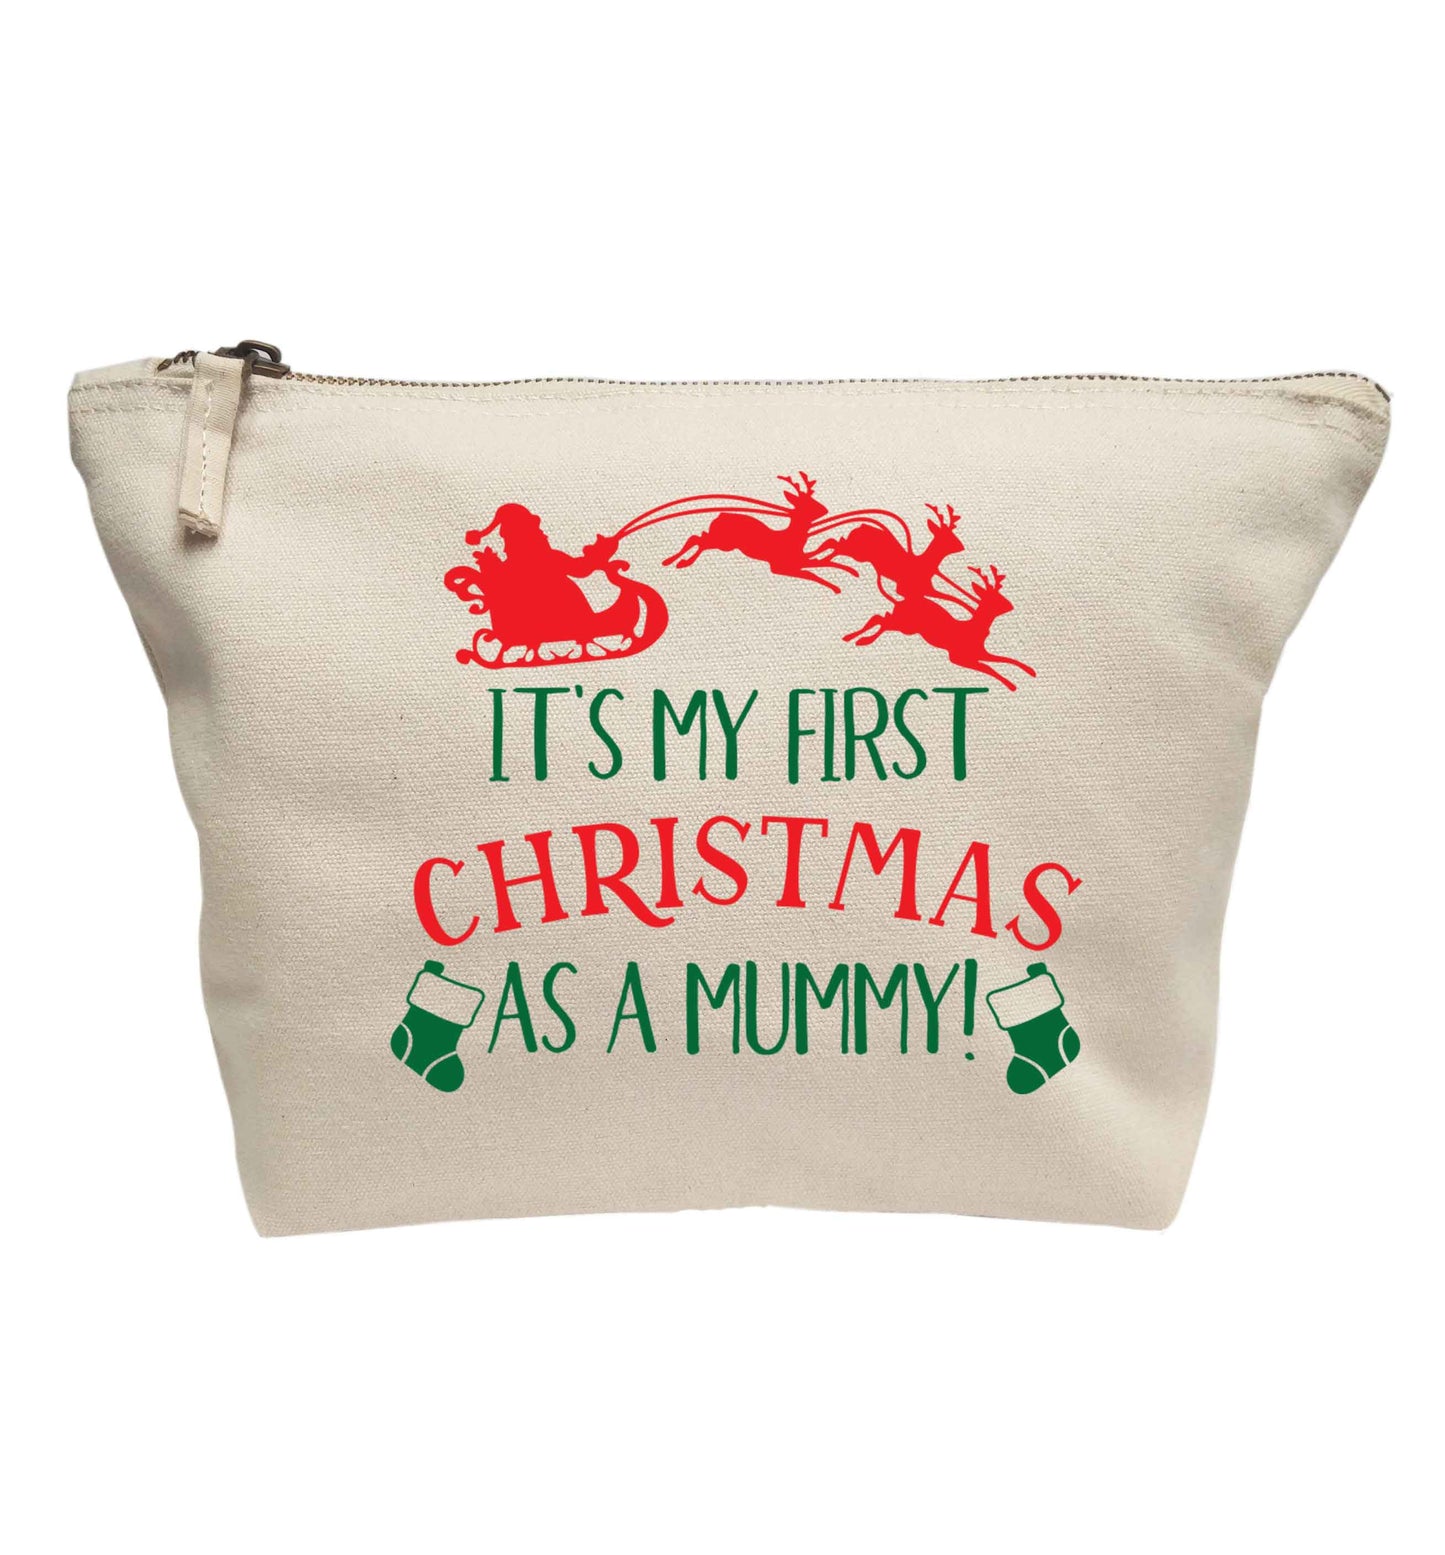 It's my first Christmas as a mummy | makeup / wash bag